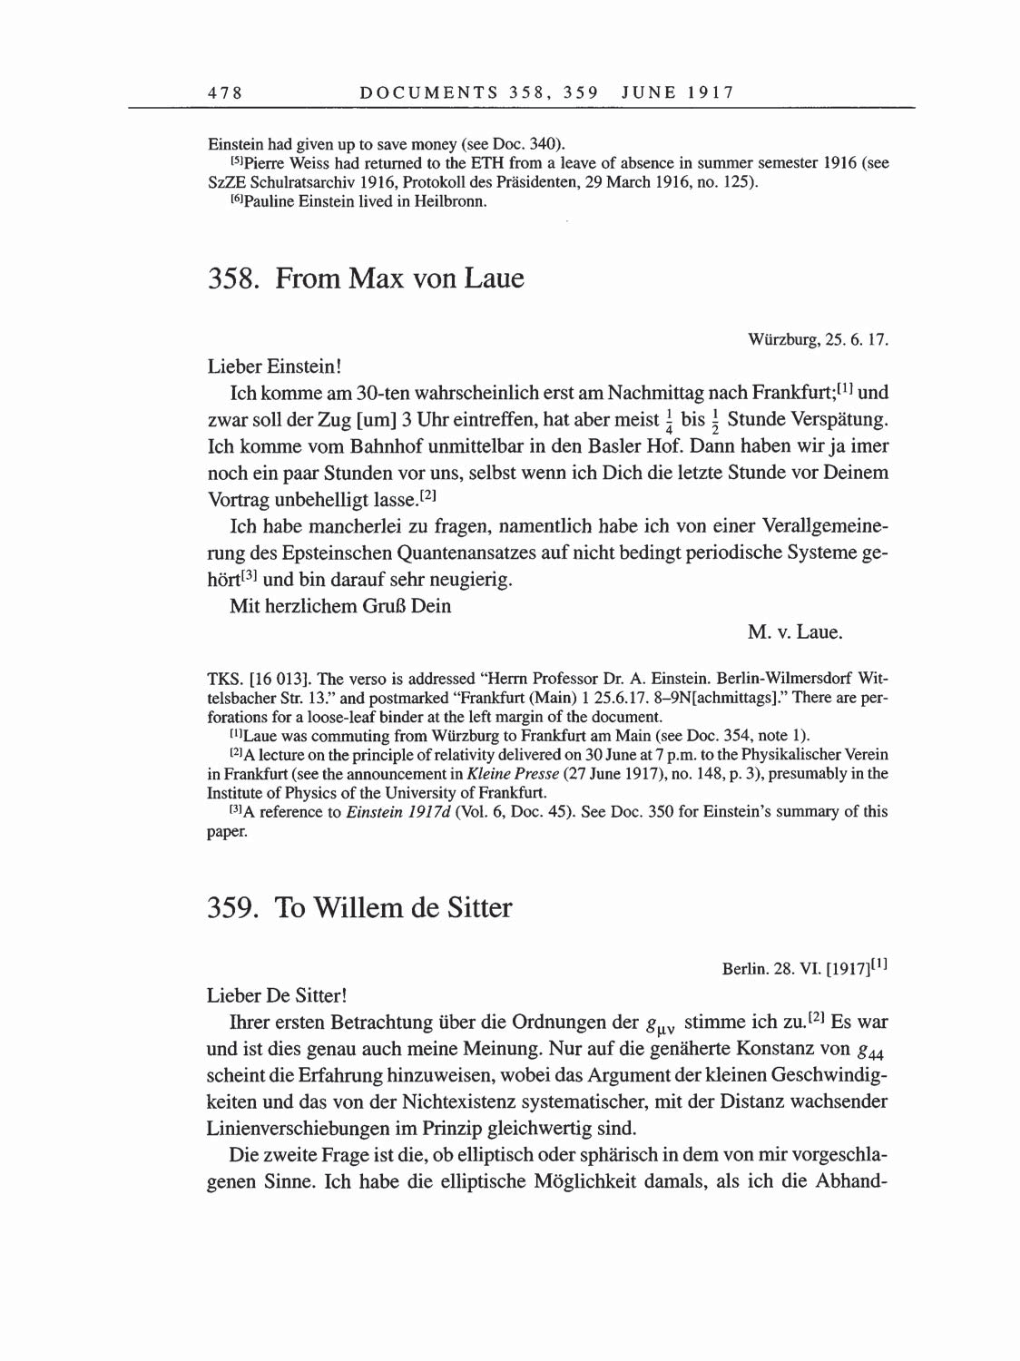 Volume 8, Part A: The Berlin Years: Correspondence 1914-1917 page 478